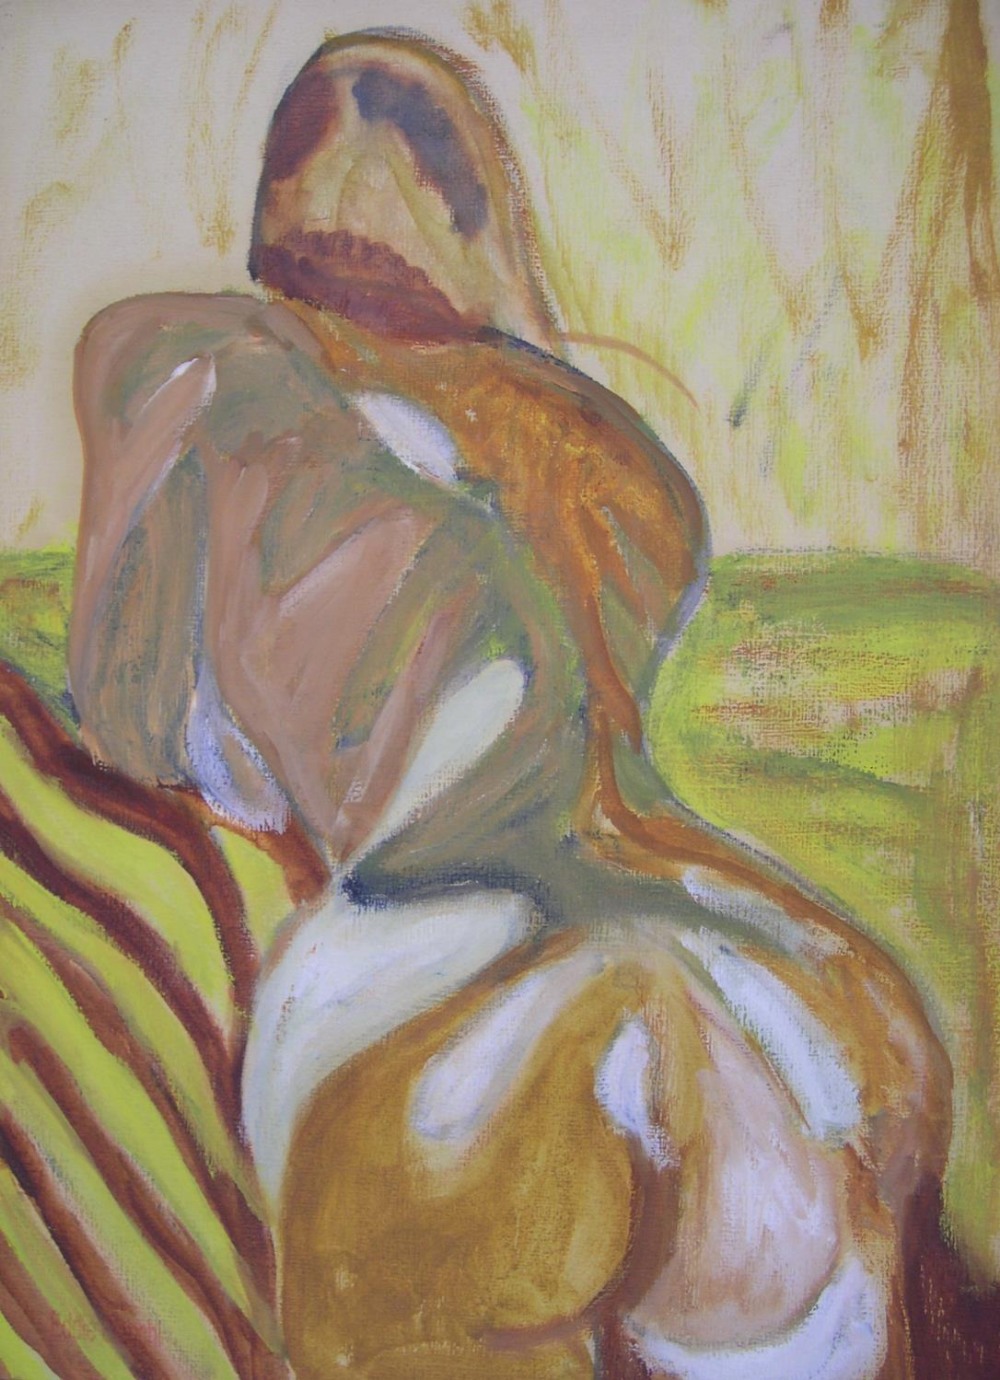 Eddie Bianchi (Newcastle-Upon-Tyne active 1975-1995) "Back of reclining female nude", oils on paper, - Image 2 of 3